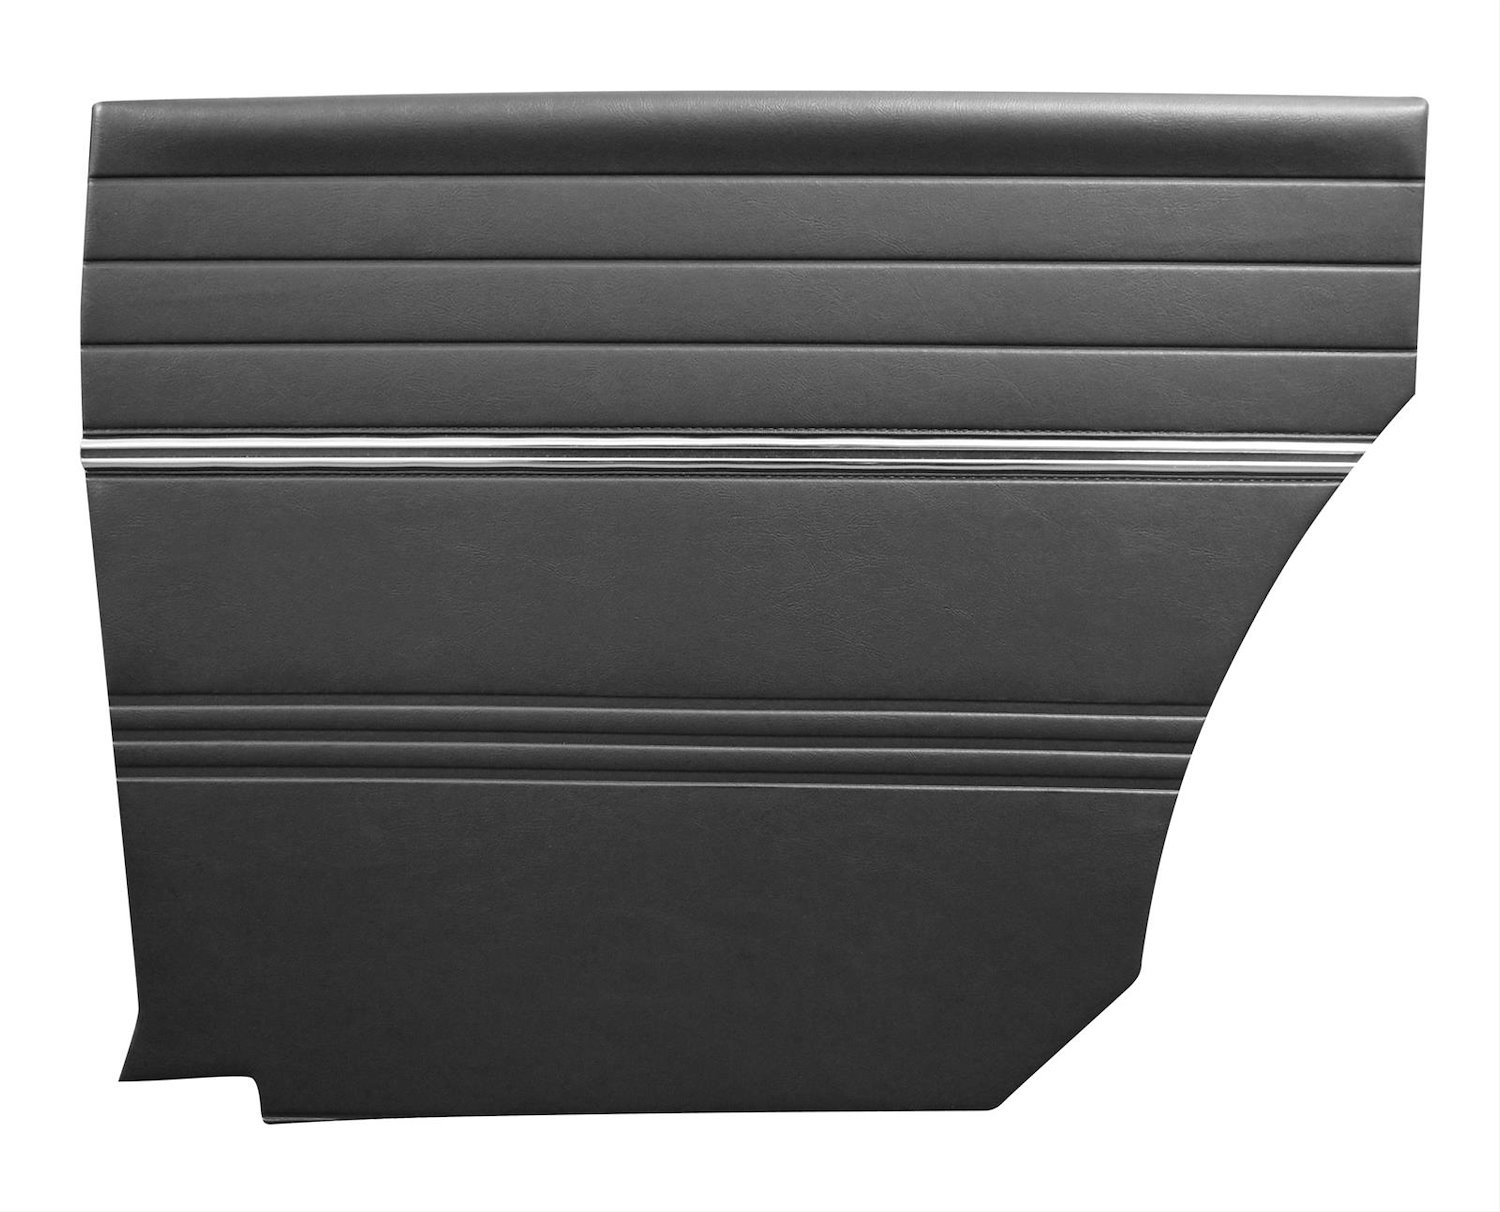 1968 Ford Galaxie 500 and 500XL Fastback Interior Rear Quarter Panel Set